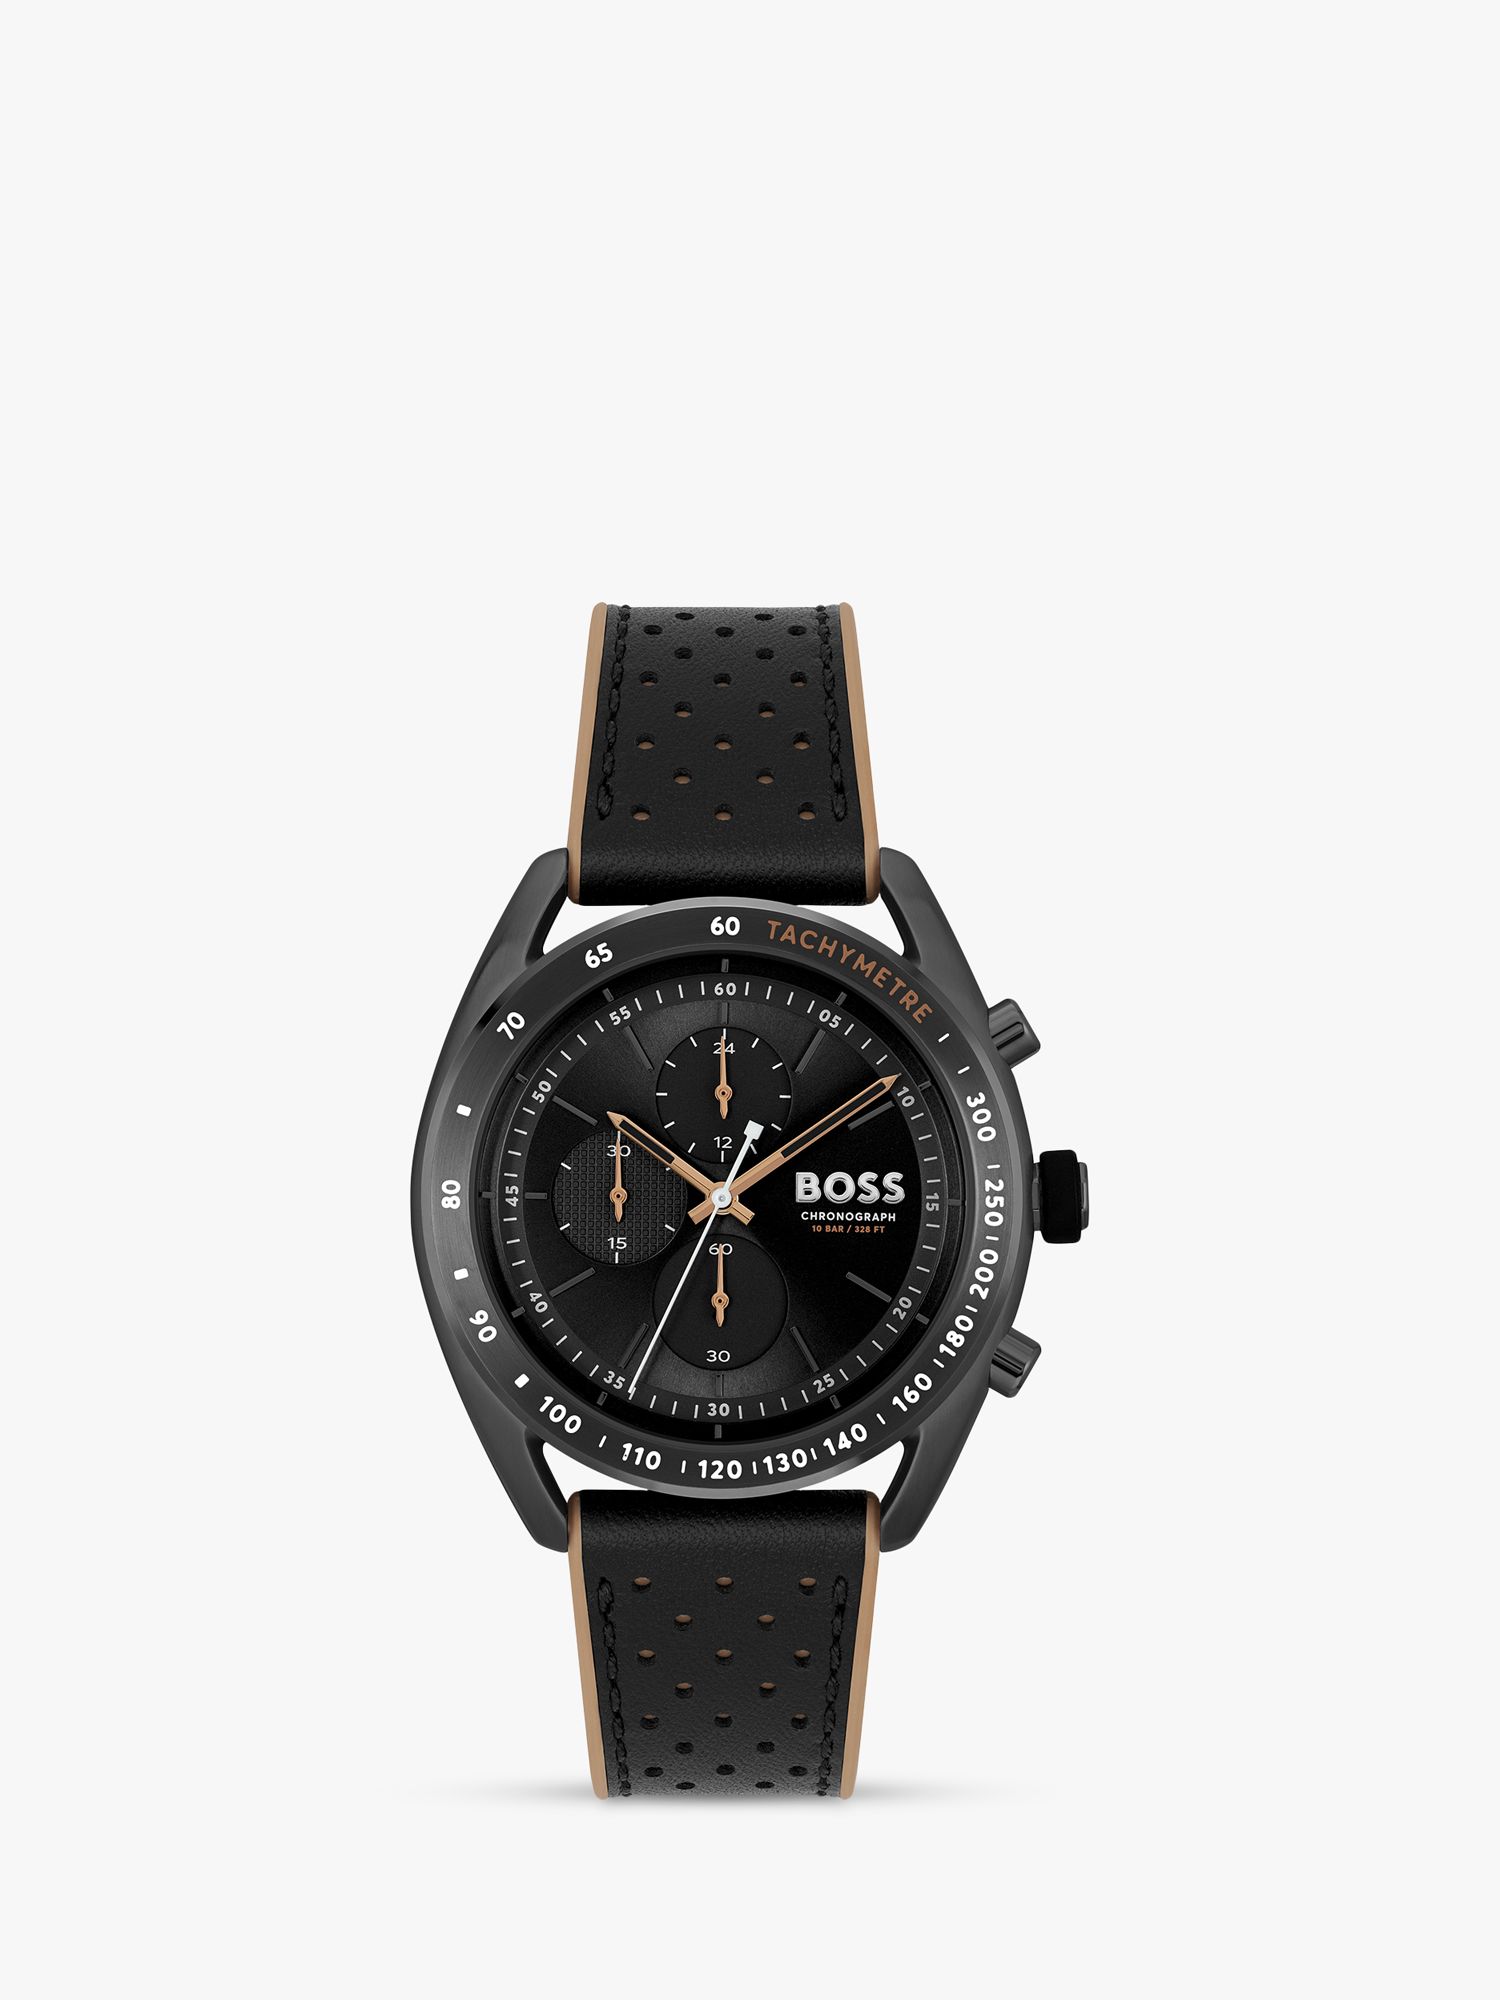 Buy BOSS 1514022 Men's Centre Court Chronograph Leather Strap Watch, Black/Brown Online at johnlewis.com